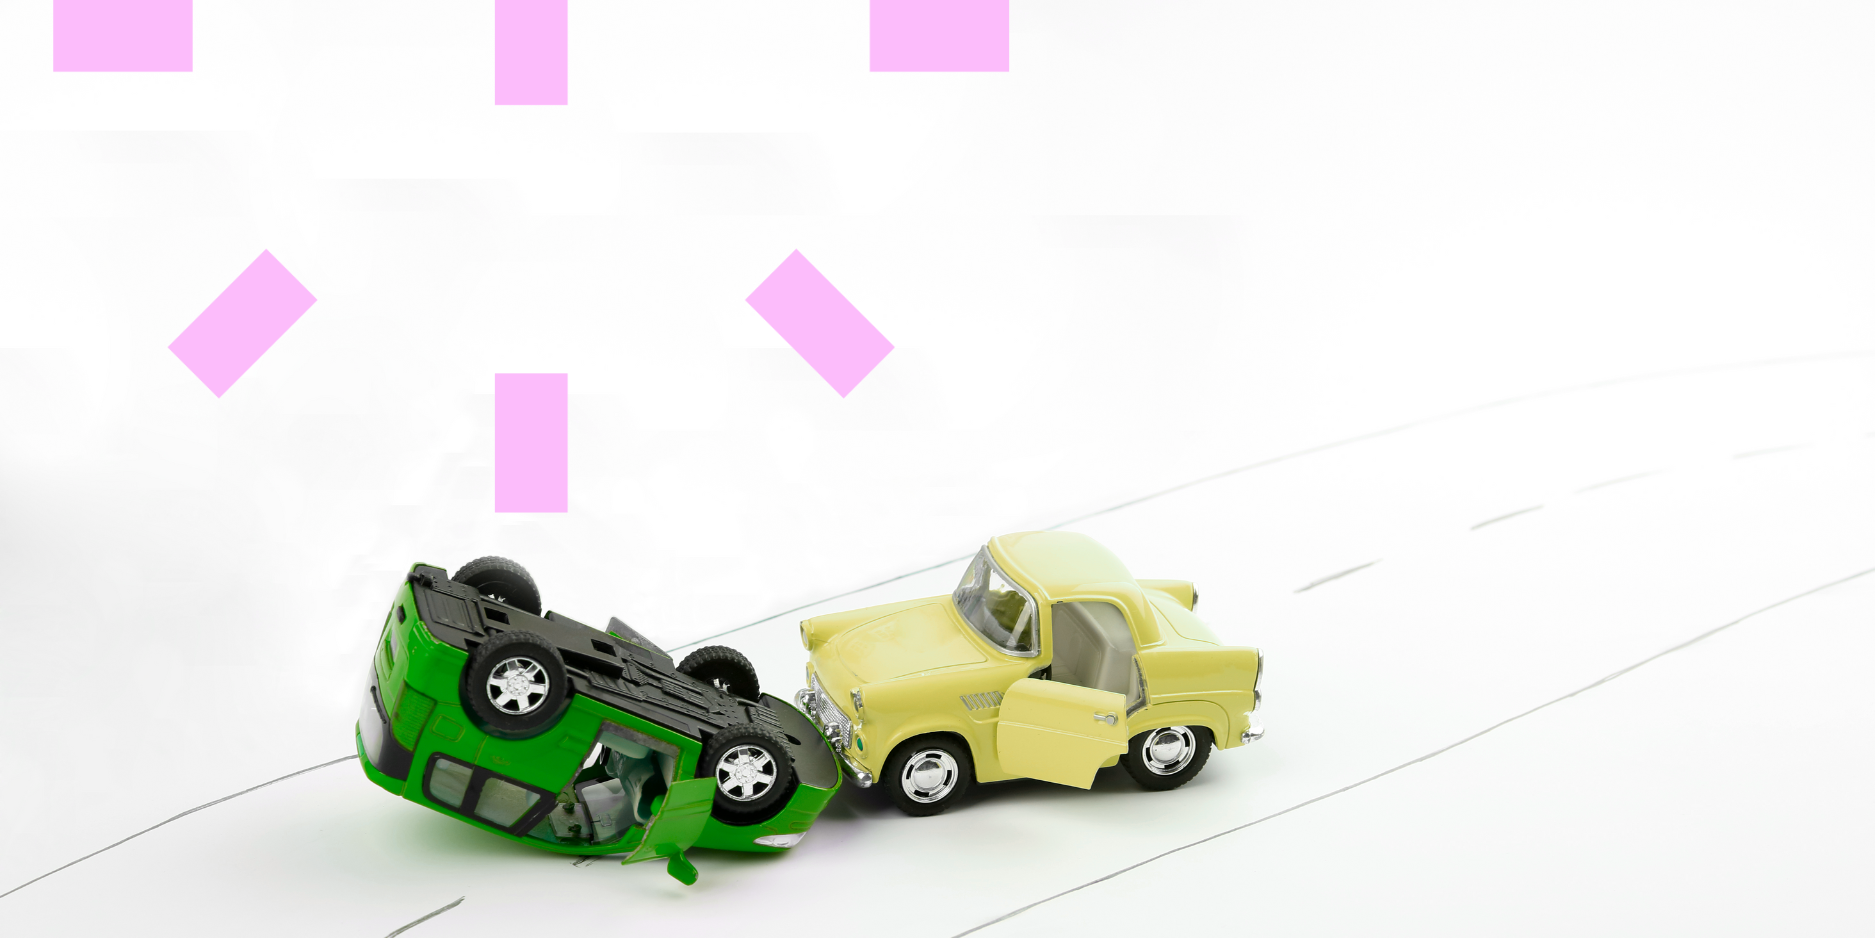 toy cars crashing into each other pink green yellow